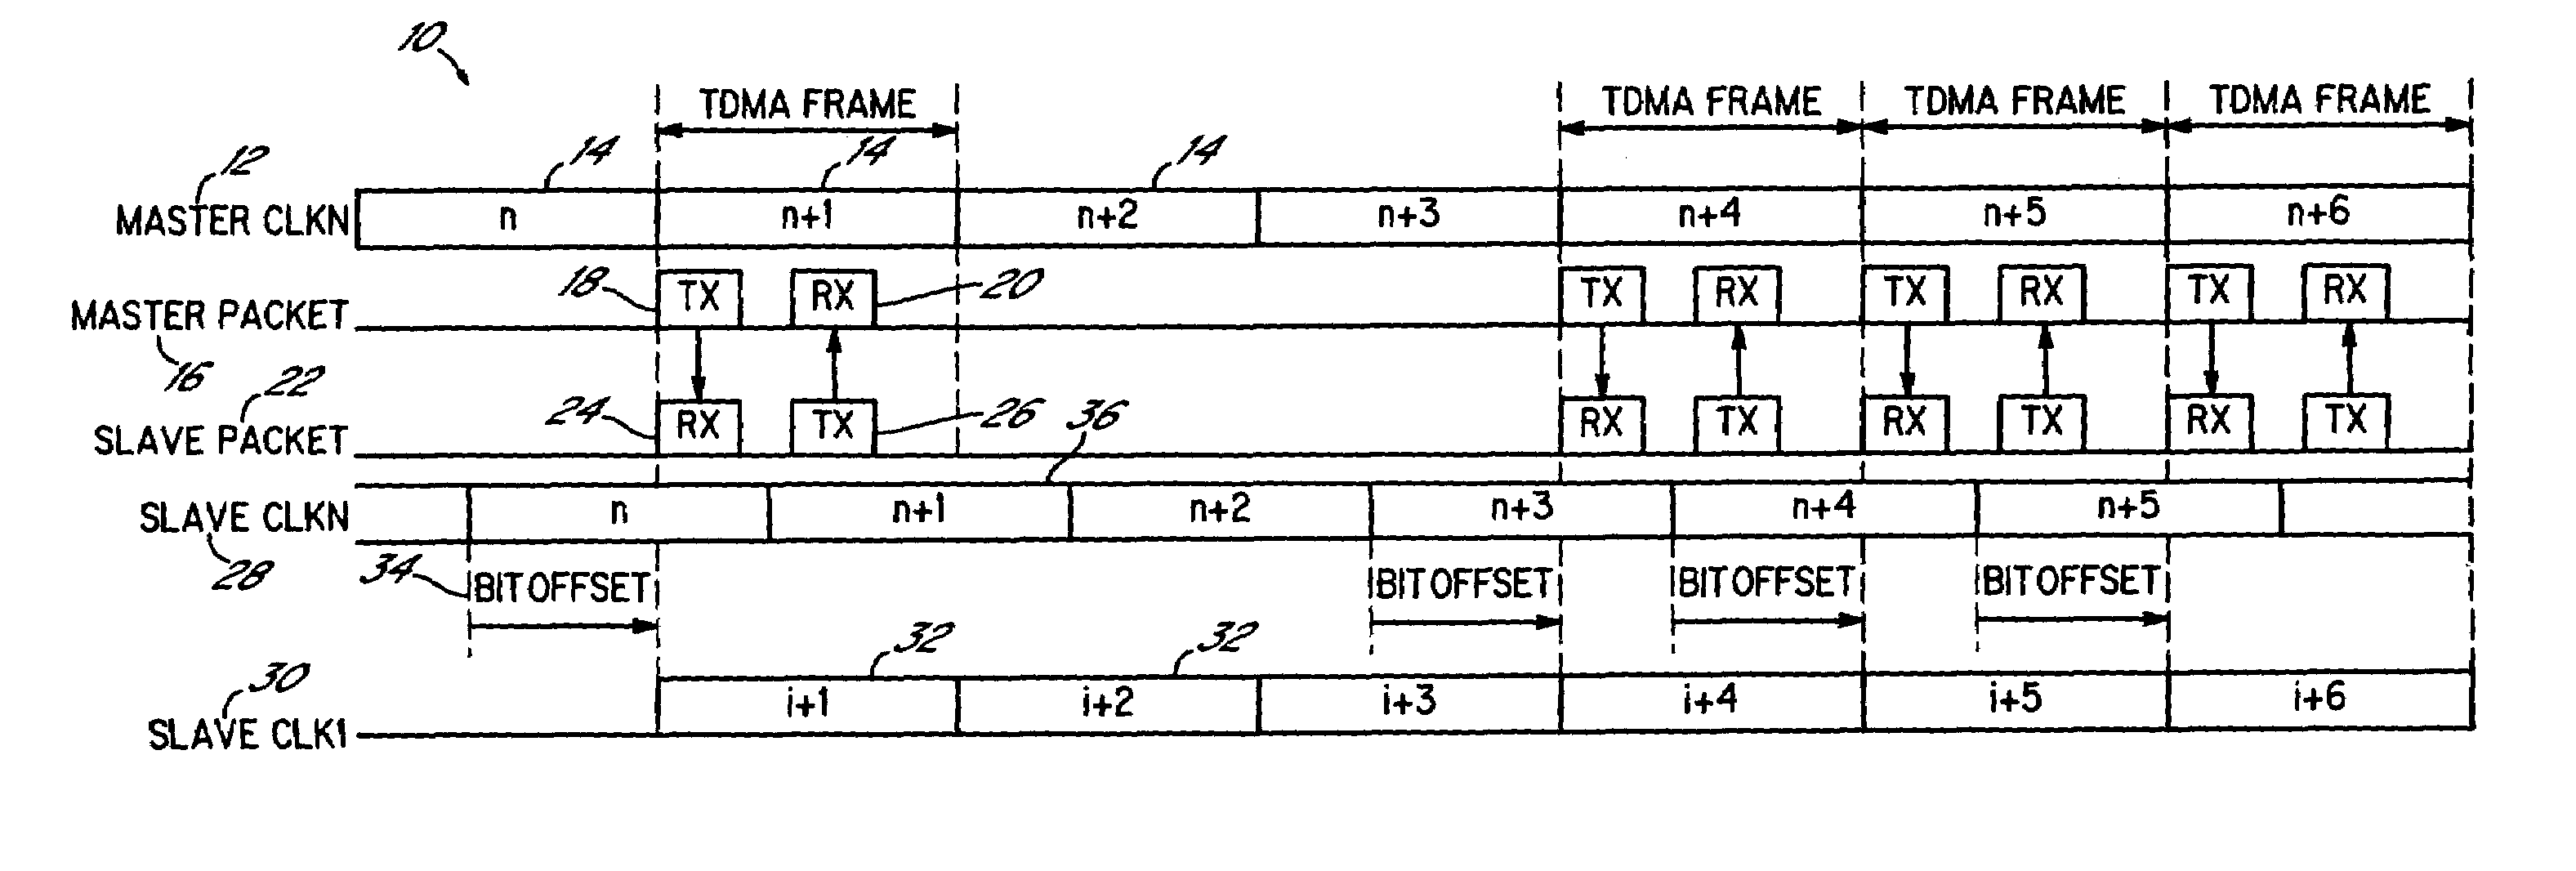 System and method for communicating between a plurality of asynchronous systems